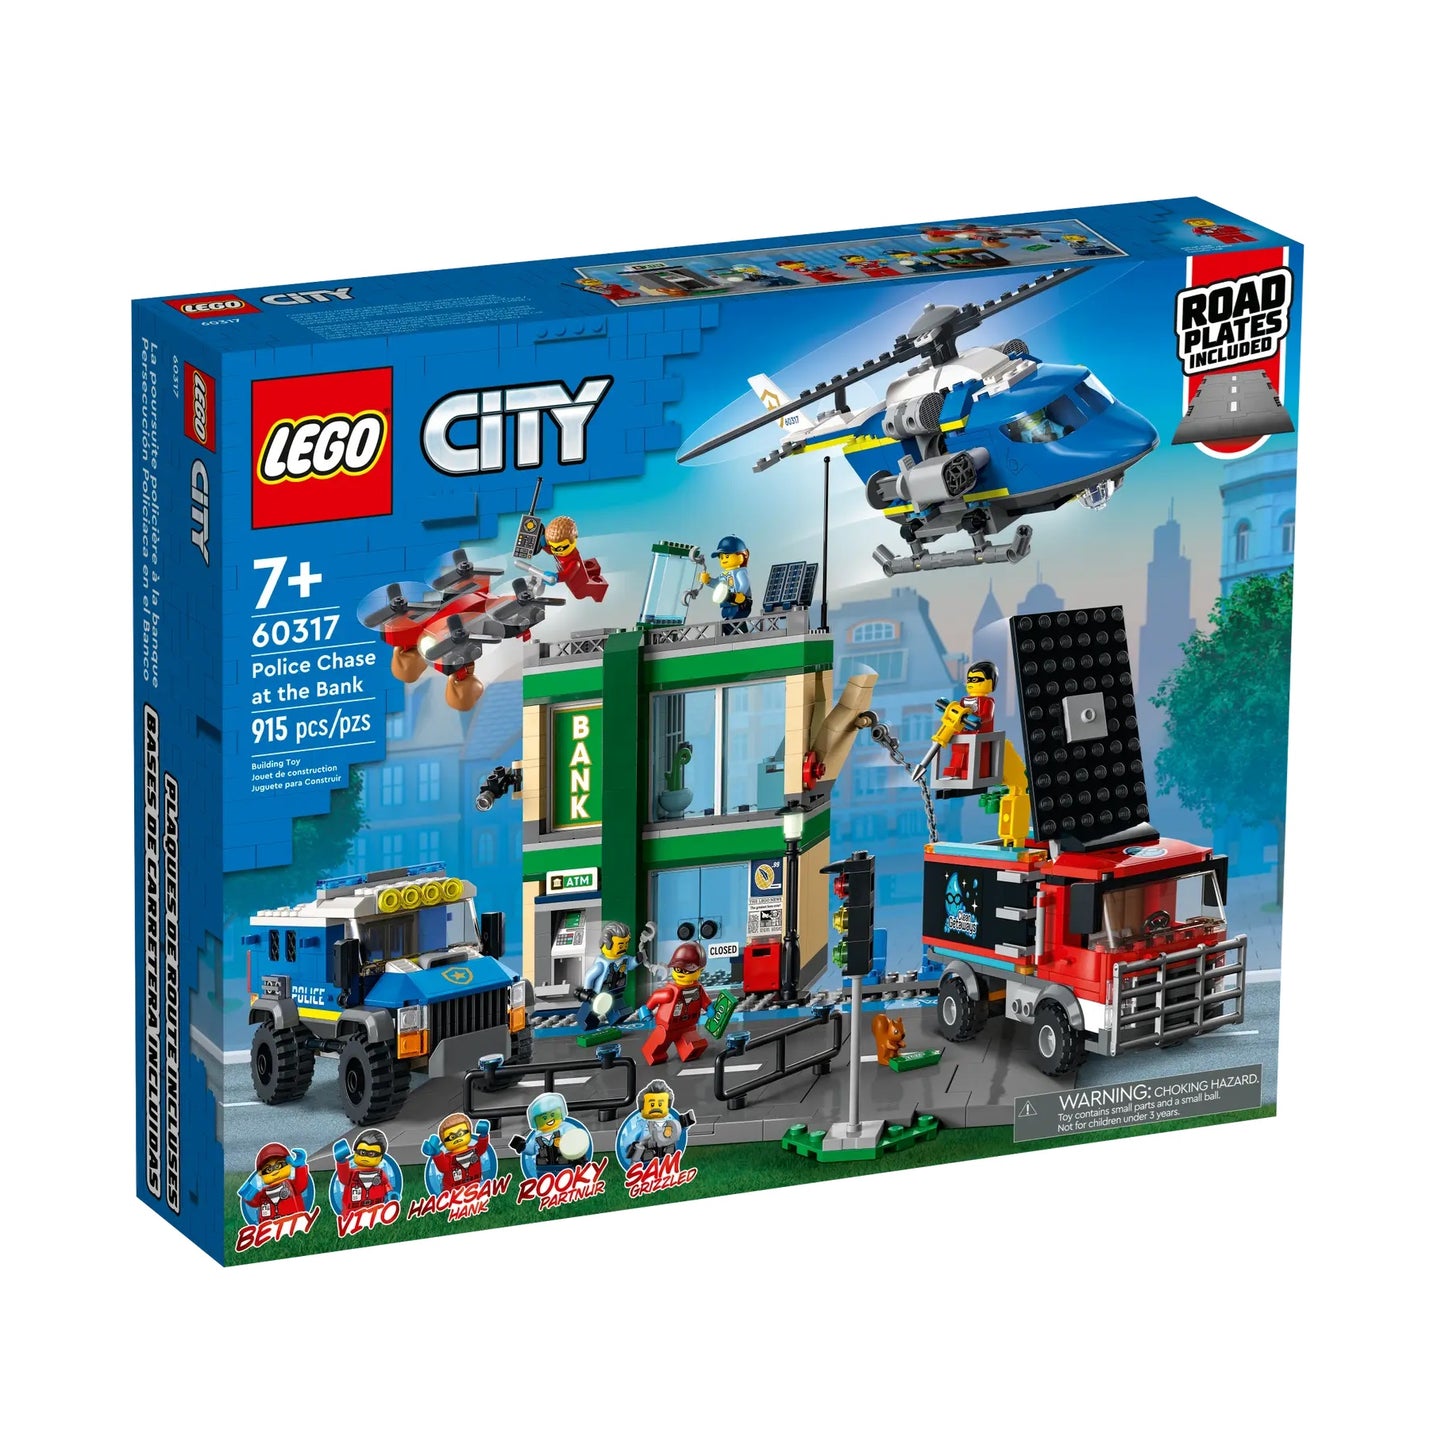 LEGO 60317 Police Chase At The Bank